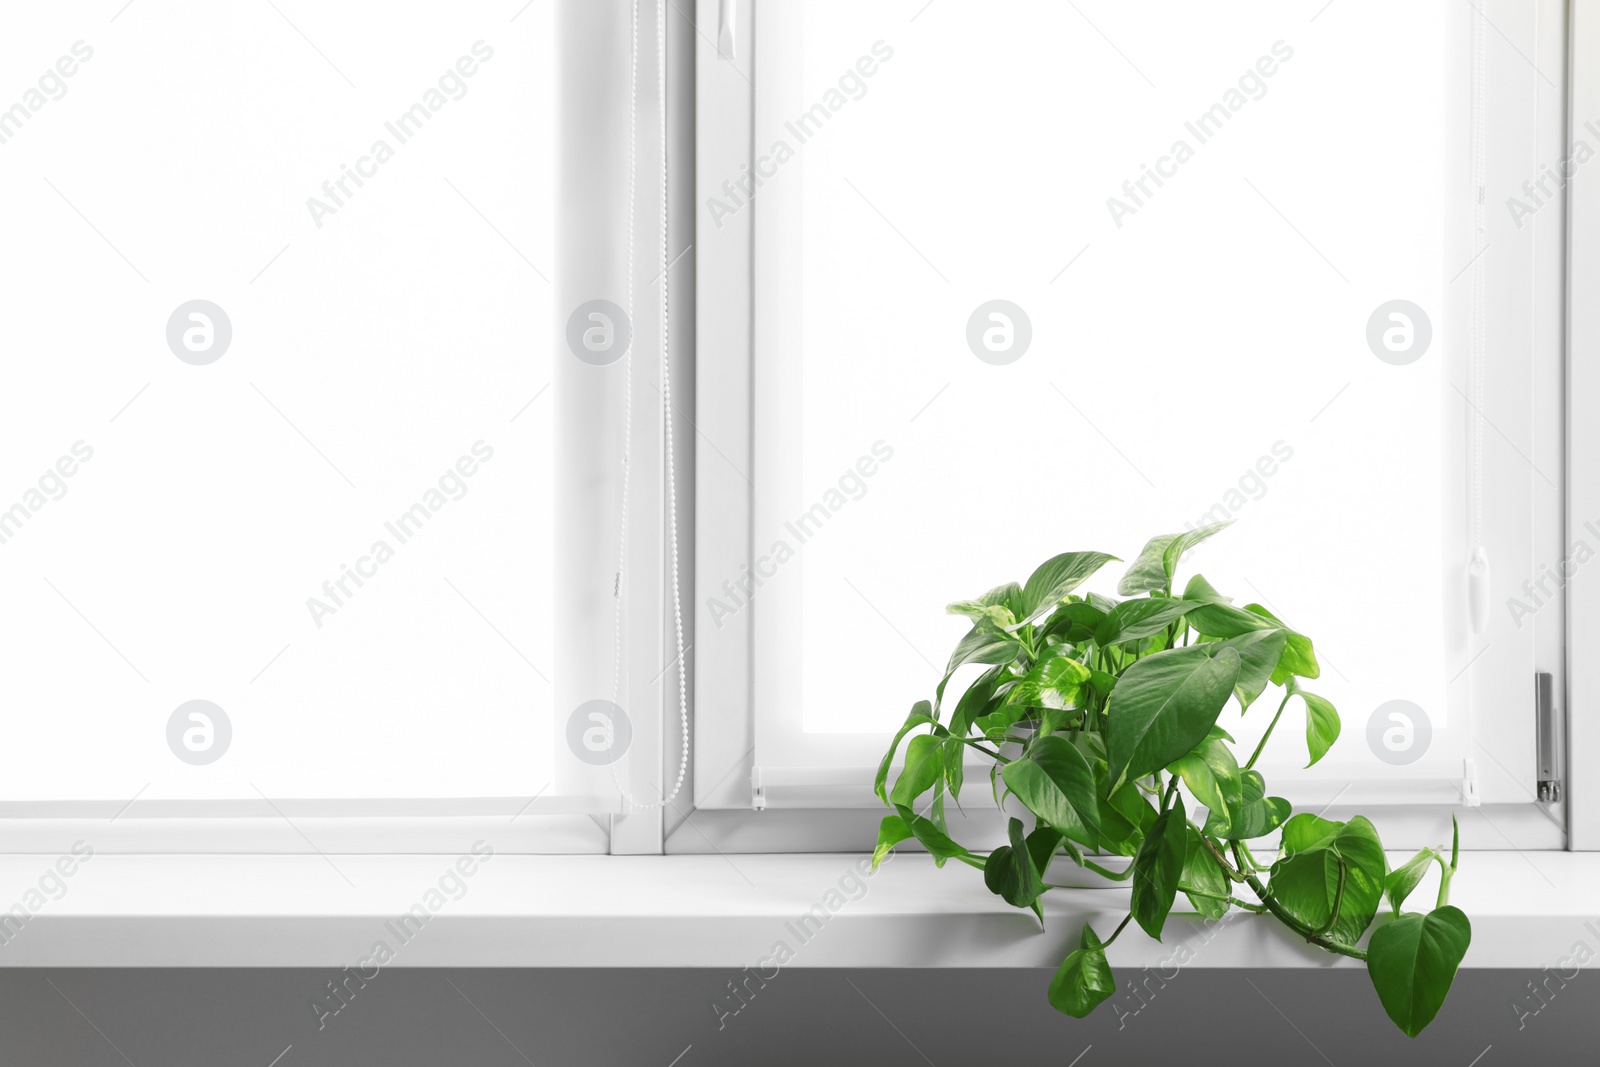 Photo of Window with blinds and potted Epipremnum plant on sill indoors